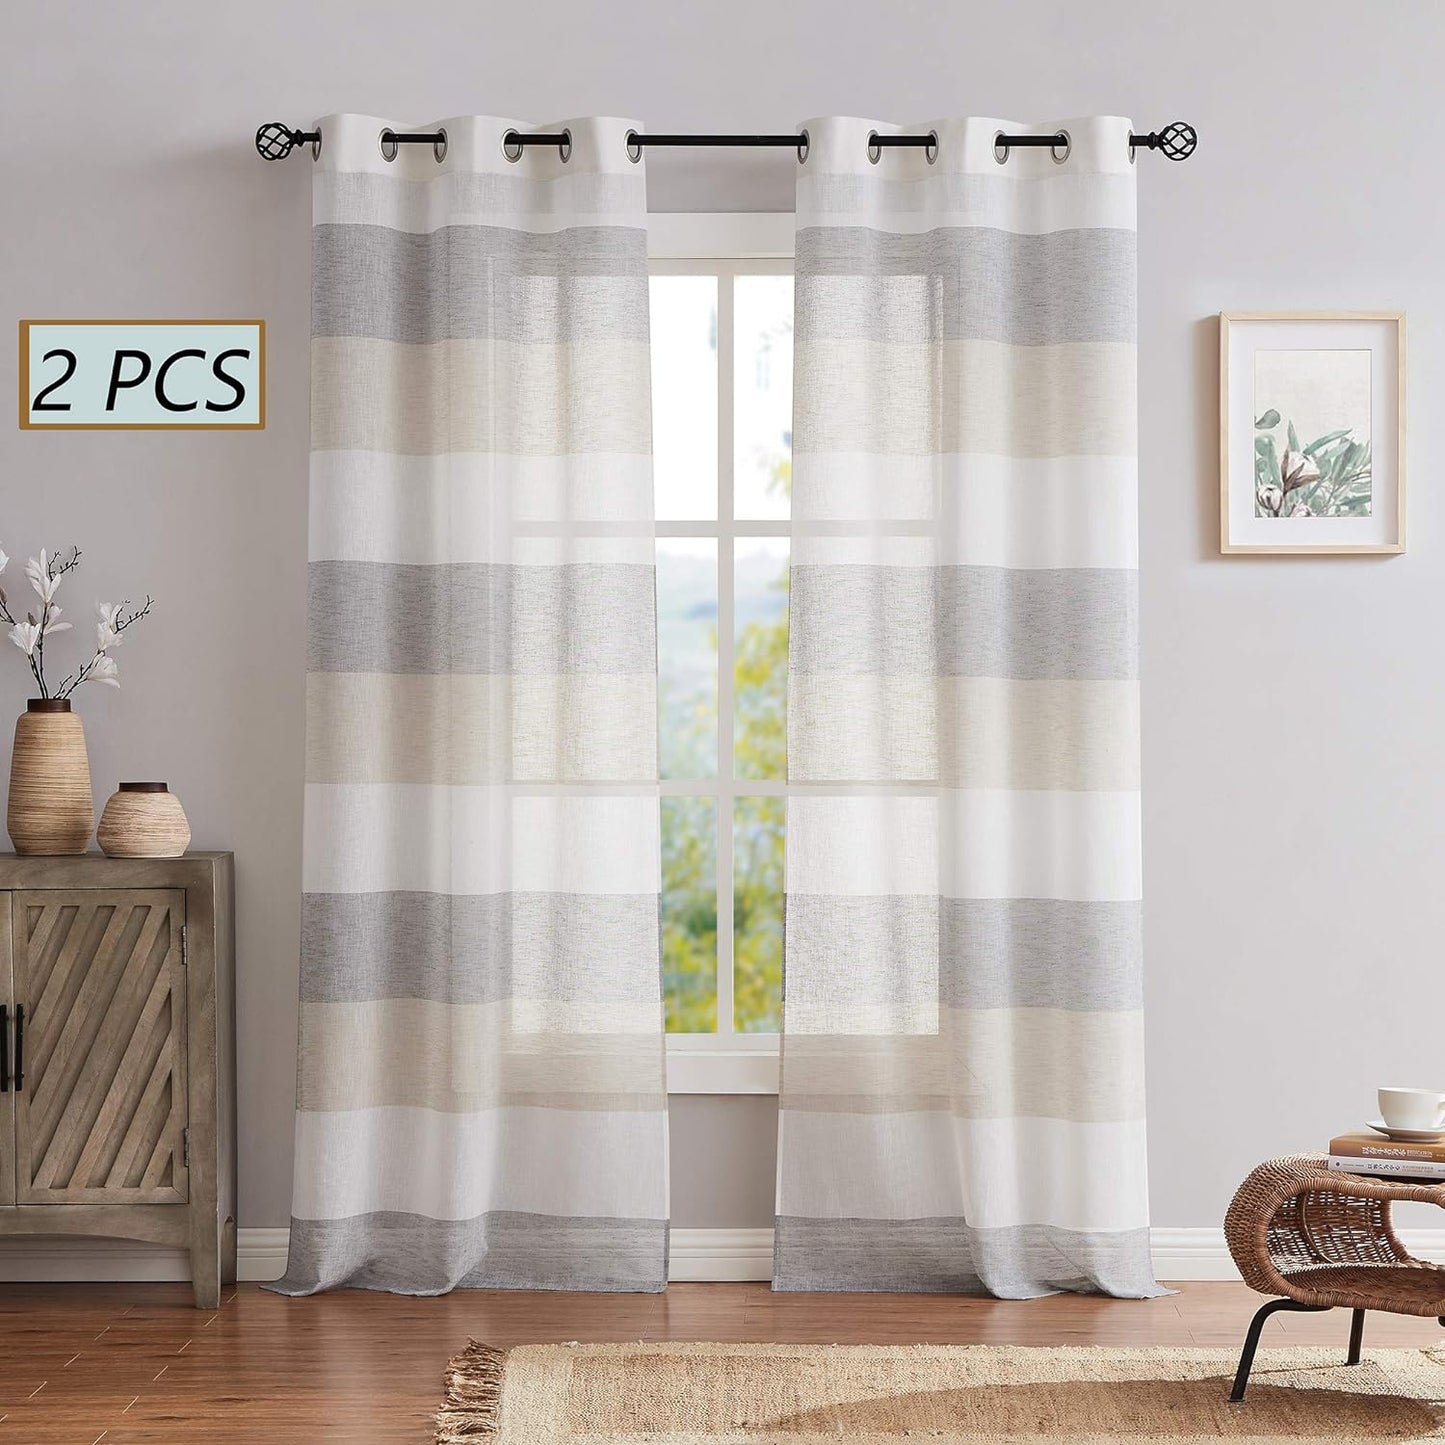 Central Park Gray Tan Stripe Sheer Color Block Window Curtain Panel Linen Window Treatment for Bedroom Living Room Farmhouse 84 Inches Long with Grommets, 2 Panel Rustic Drapes  Central Park Gray/Tan 40"X63"X2 